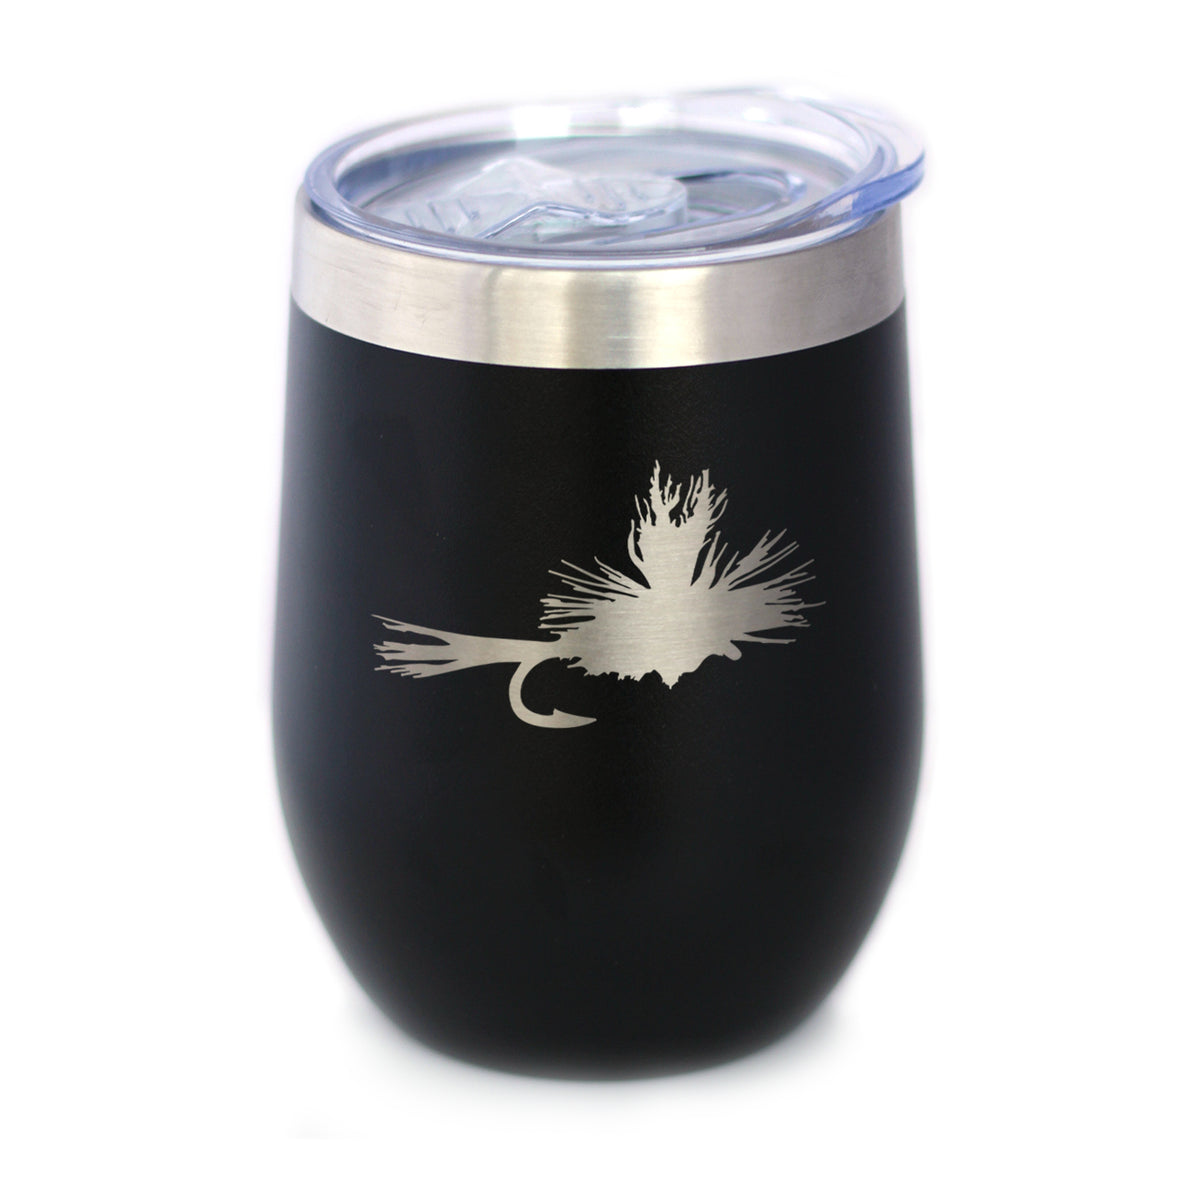 Fishing Fly - Wine Tumbler Glass with Sliding Lid - Stainless Steel Insulated Mug - Unique Flyfishing Gifts for Fishermen